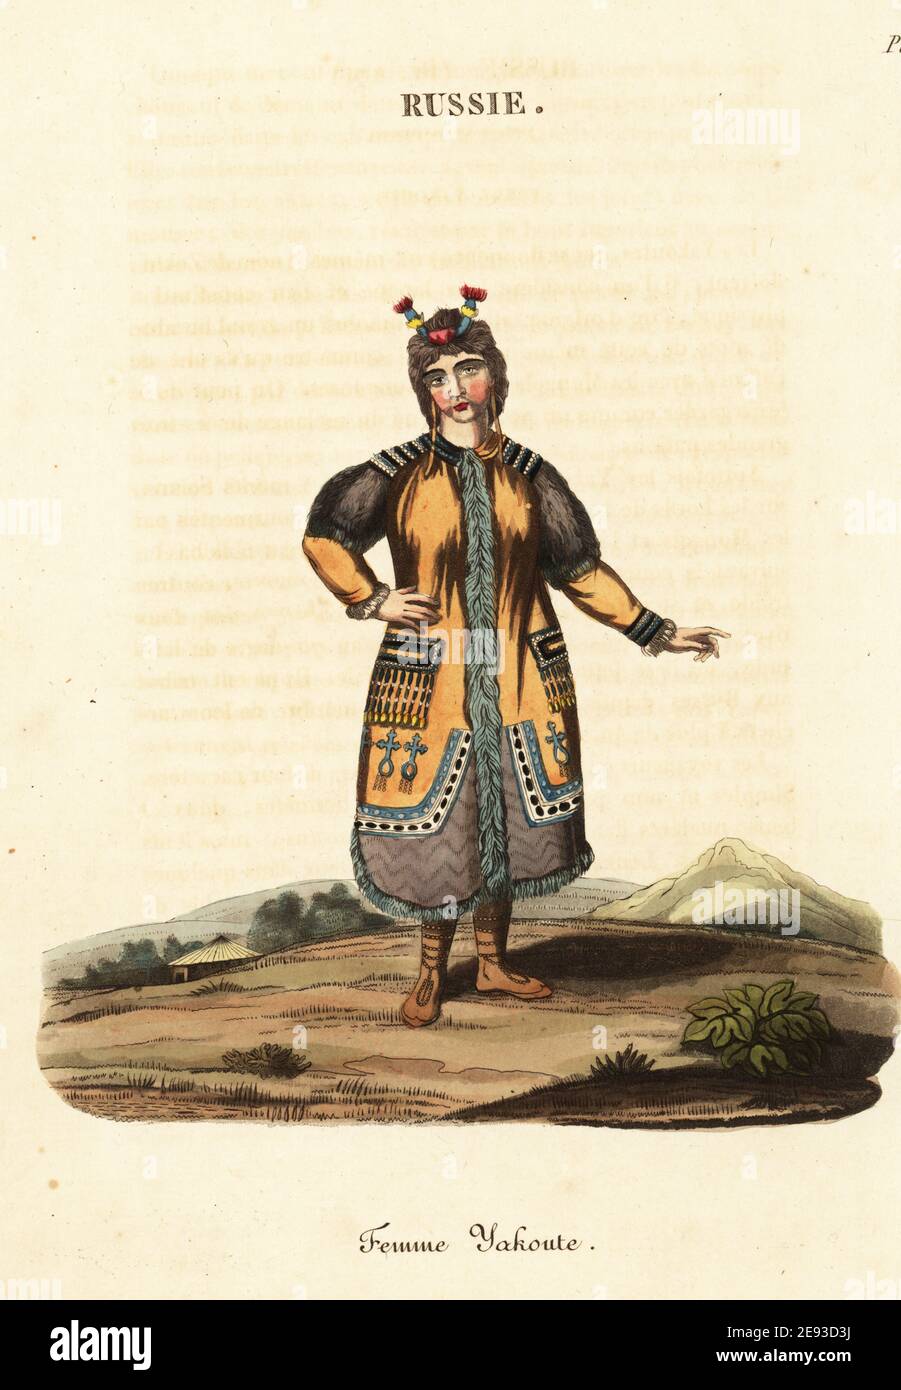 Married woman of the Yakut or Sakha people, 18th century. She wears a curious hair ornament, long earrings, and animal-skin vest decorated with beads and fringes. Female Yakouti, Femme Yakoute. Handcoloured copperplate engraving after an illustration by William Alexander from J-B. Eyries’ La Russie: Costumes, Moeurs et Usages des Russes, Russia: Costumes, Manners and Mores of the Russians, Librairie de Gide Fils, Paris, 1823. Jean-Baptiste Eyries (1767-1846) was a French geographer, author and translator. Stock Photo